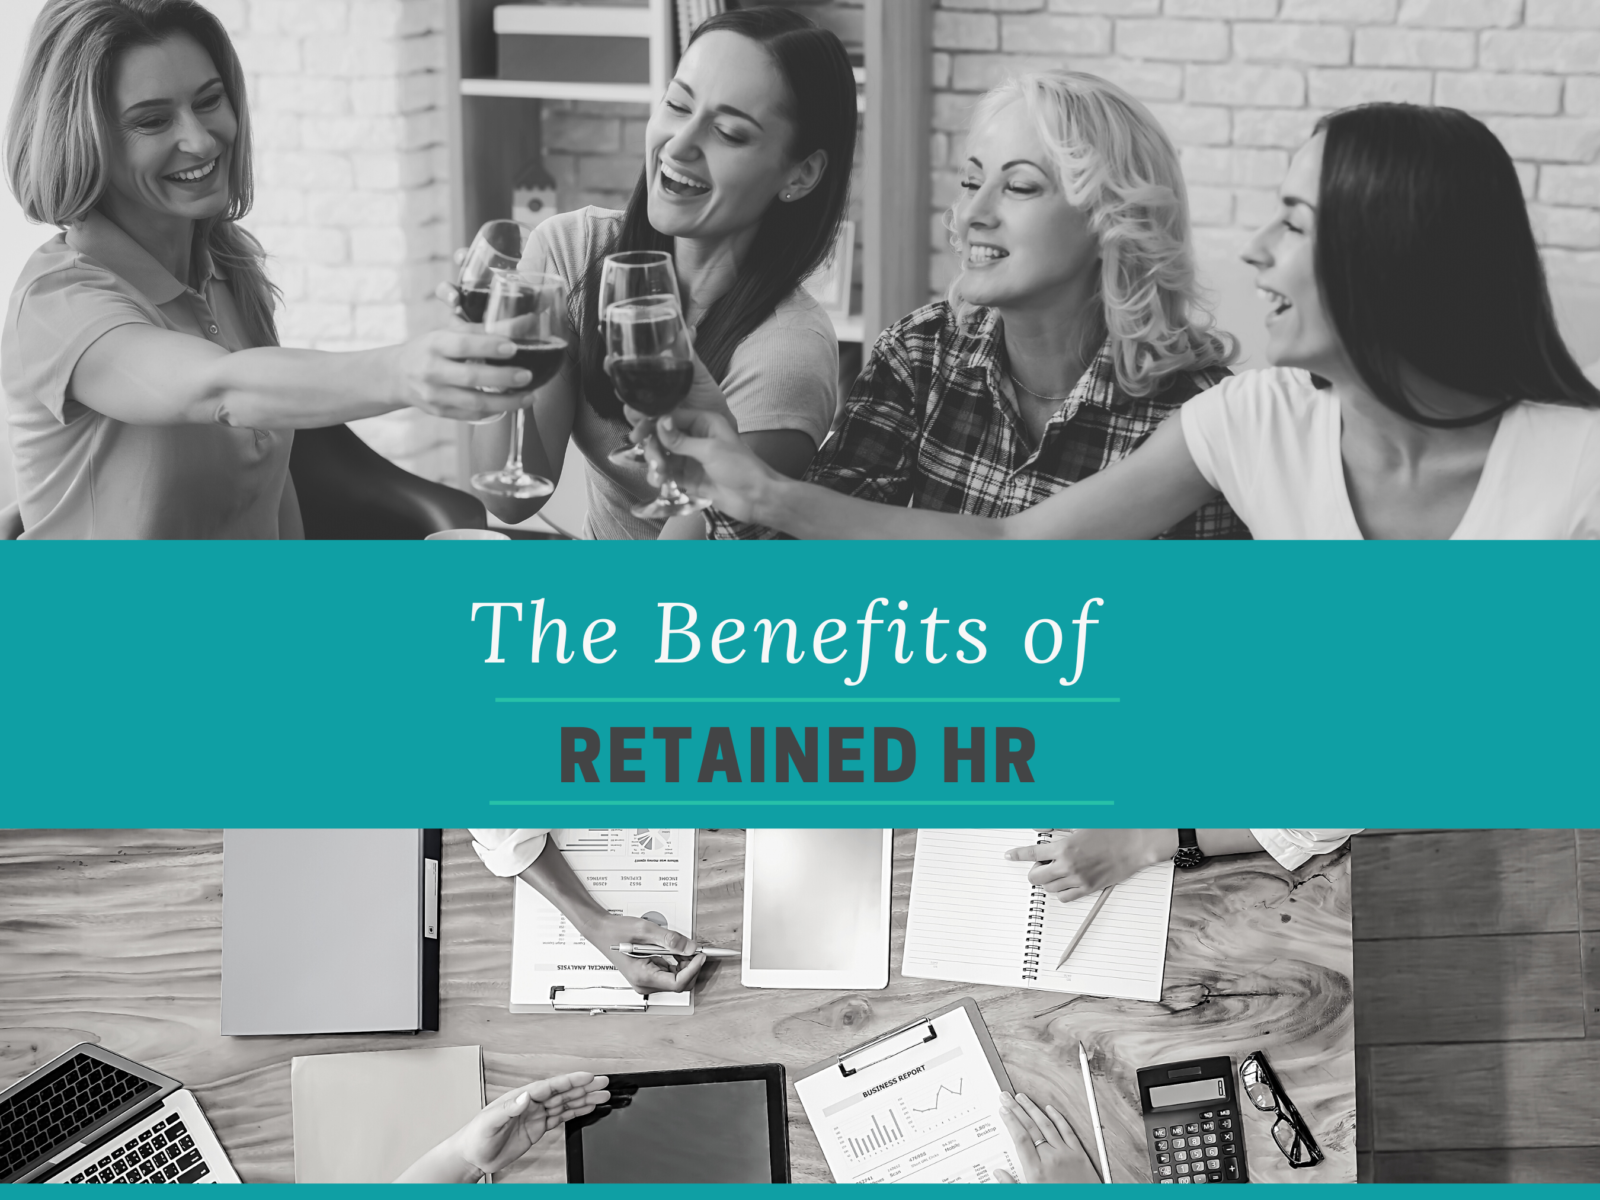 Four joyful women raise their glasses -celebrating their successful partnership and the positive outcomes they have achieved through Retained HR services with Jacquelyn Lloyd Consulting.